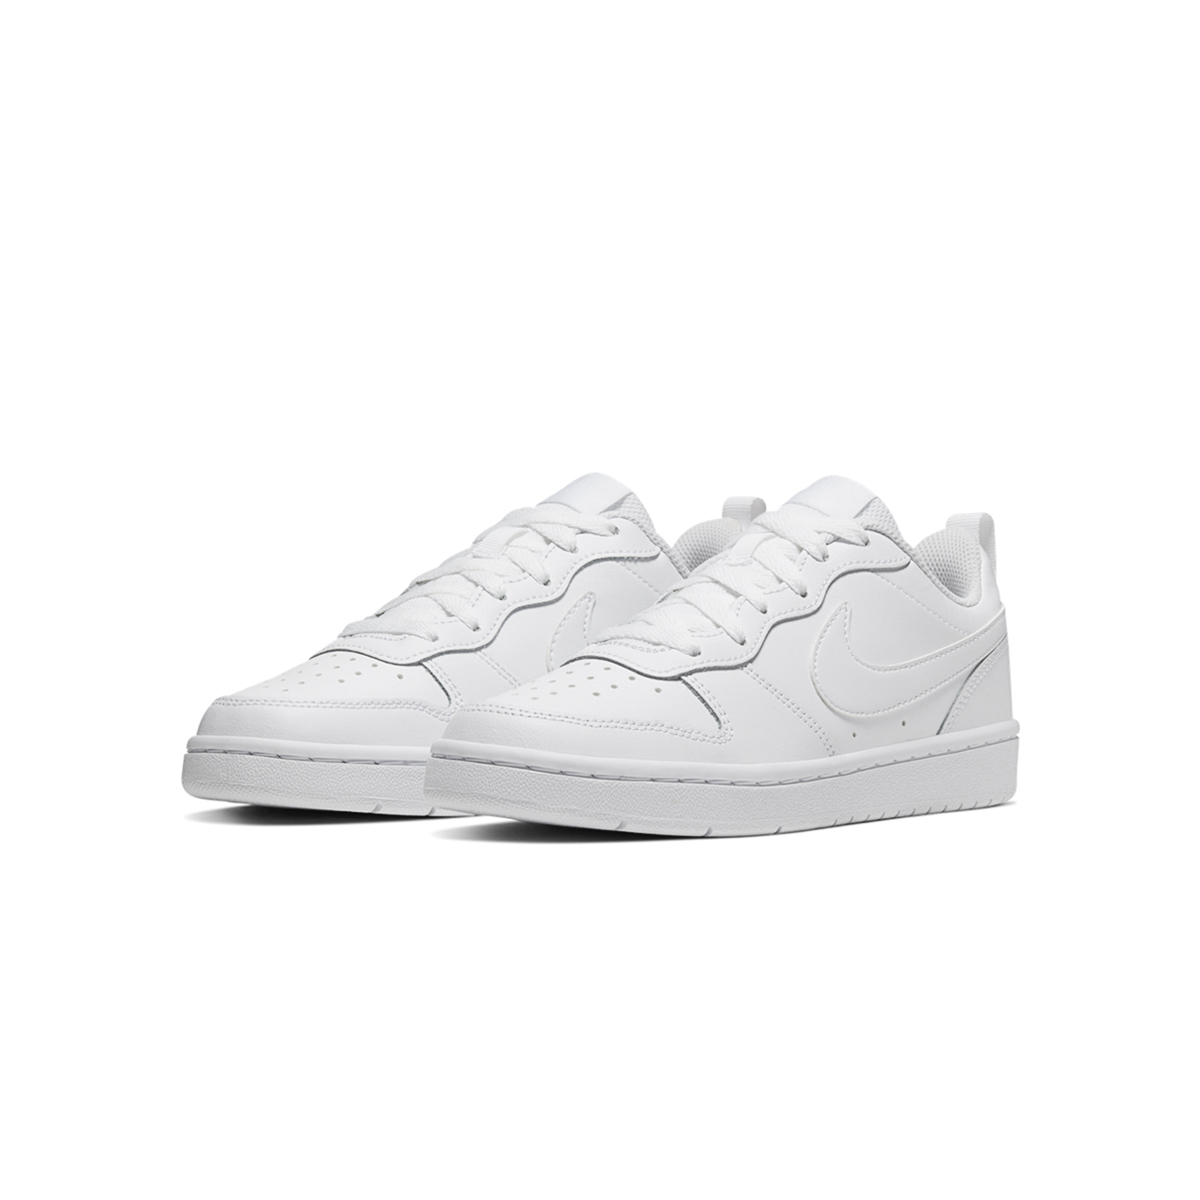 Zapatillas Nike Court Borough Low 2,  image number null